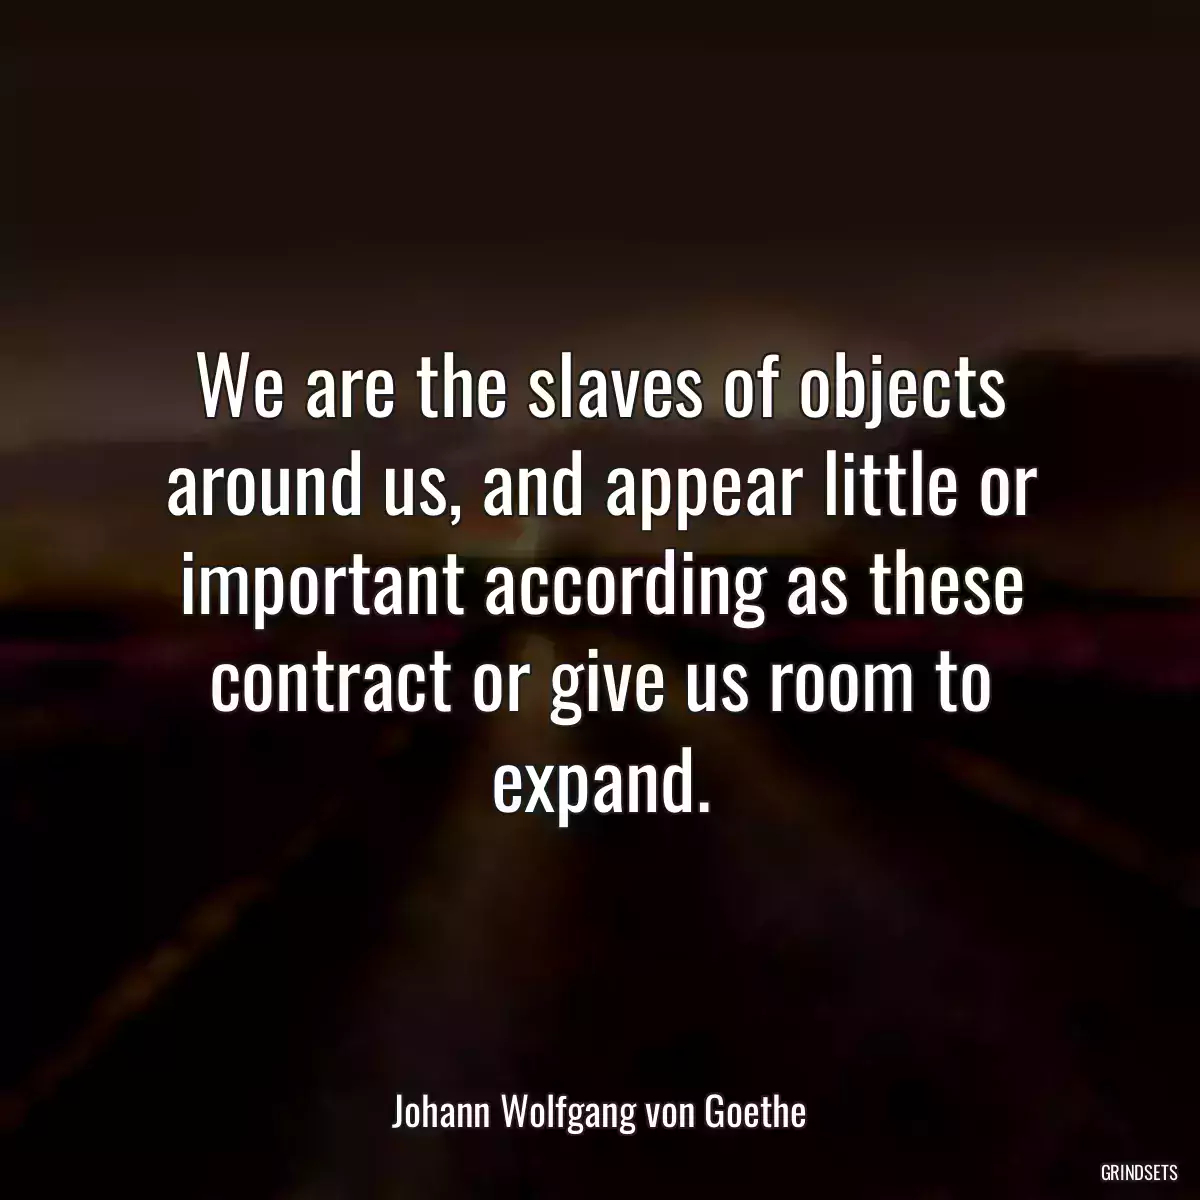 We are the slaves of objects around us, and appear little or important according as these contract or give us room to expand.